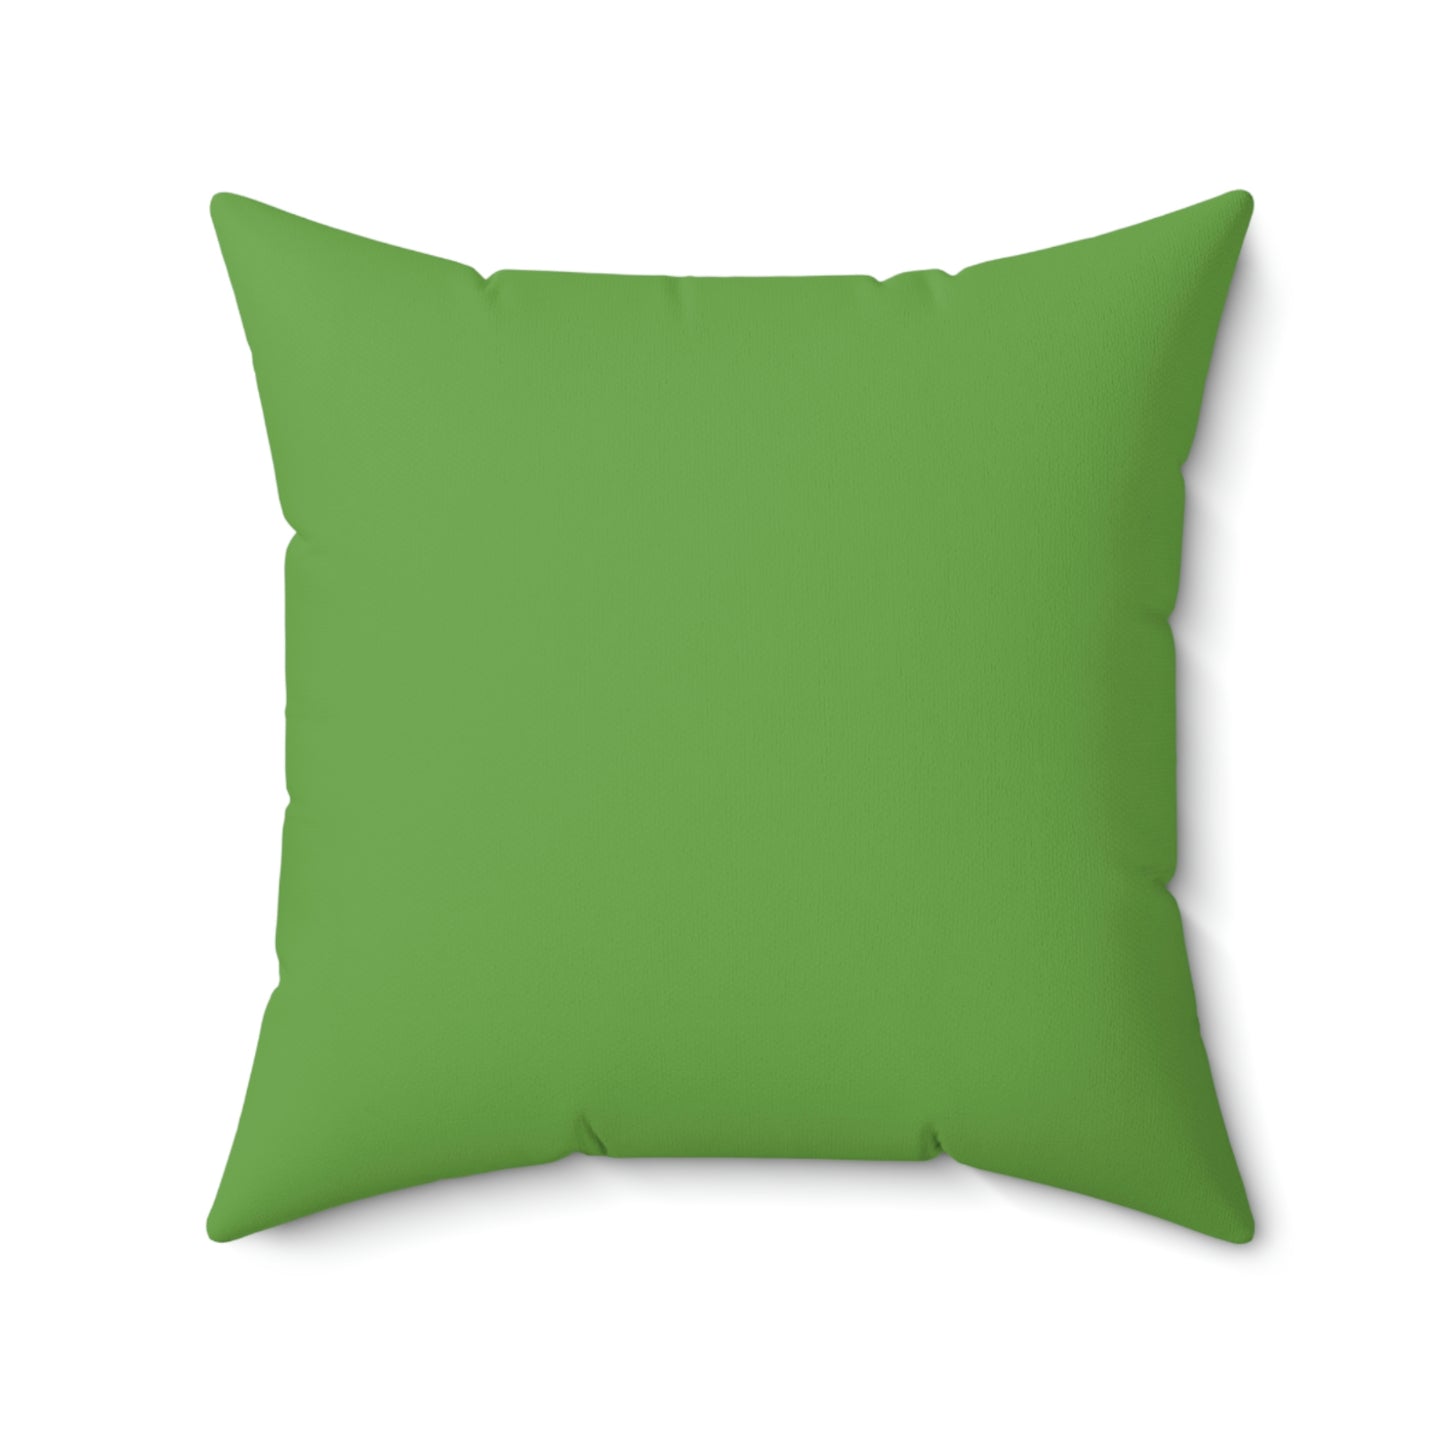 Spun Polyester Square Pillow Case "Dad Level Unlocked on Green”